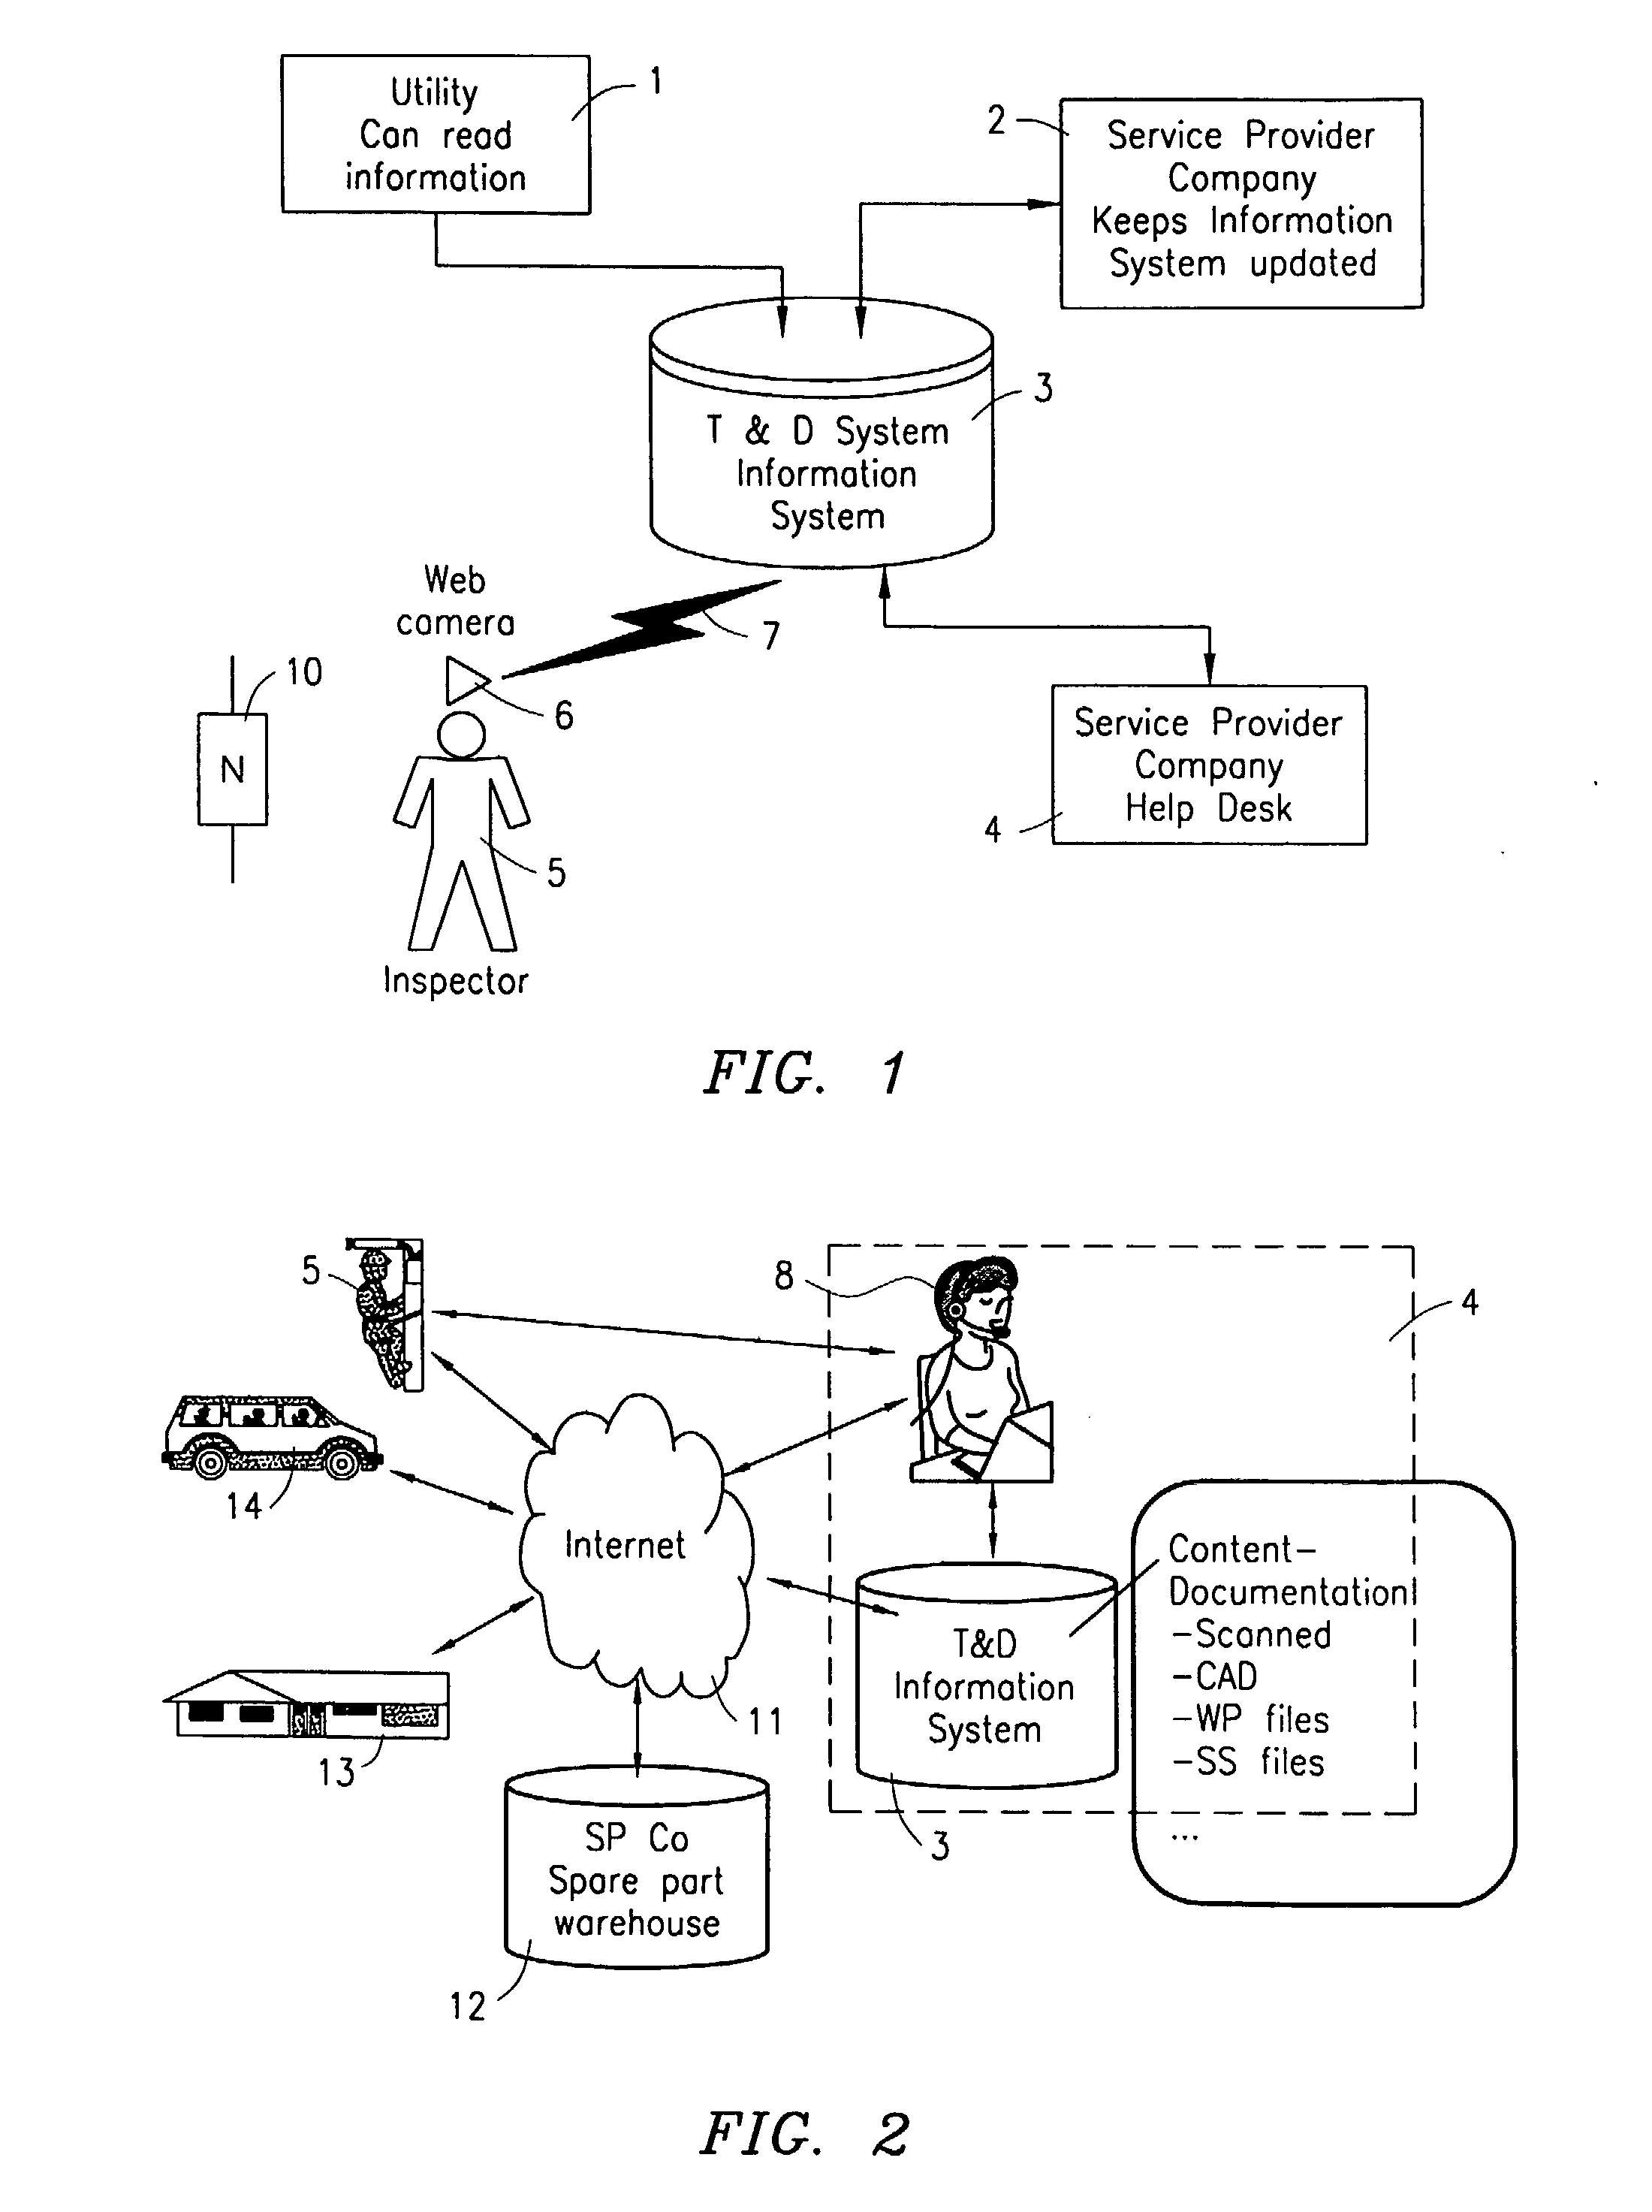 System and method to provide maintenance for an electrical power generation, transmission and distribution system